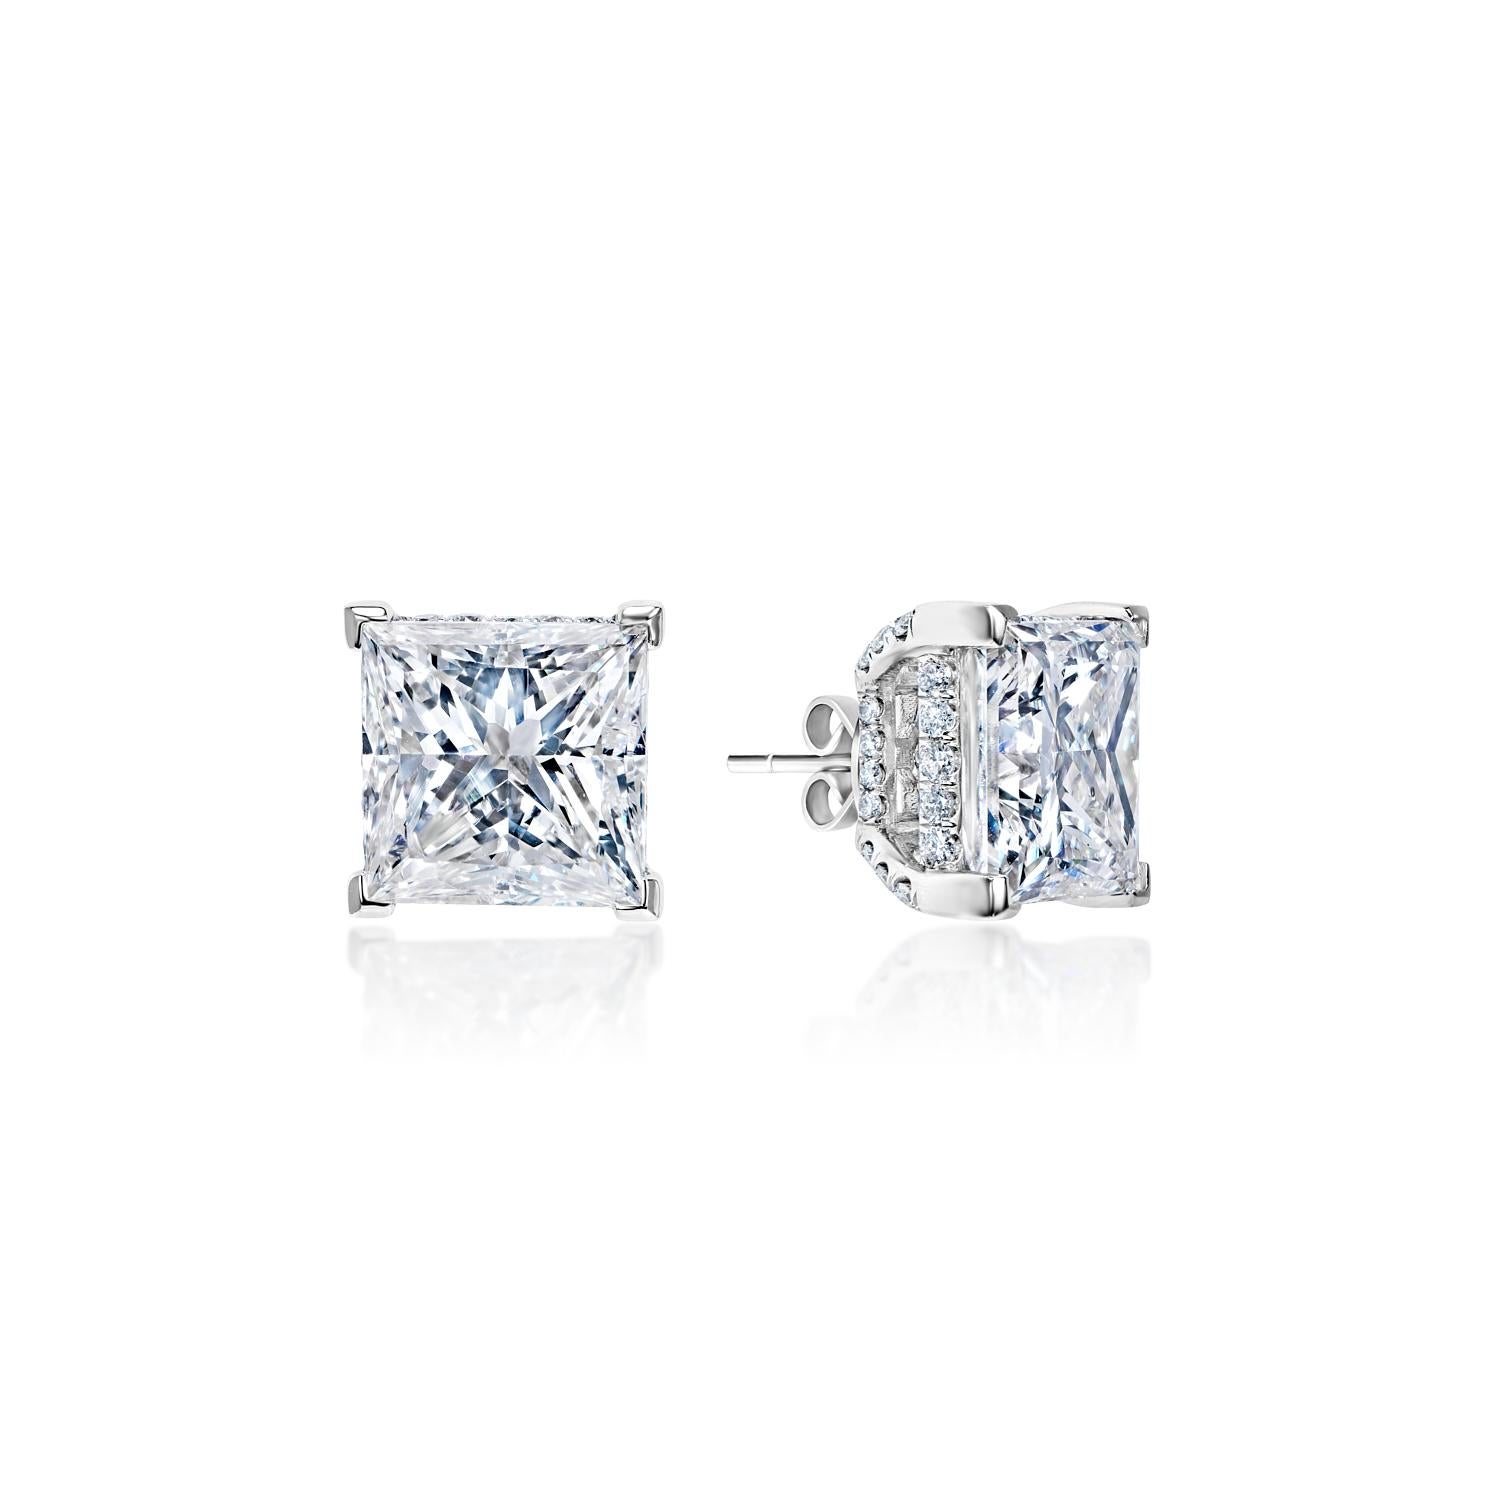 14 Carat Princess Cut Diamond Stud Earrings Certified G - F VS2 In New Condition For Sale In New York, NY